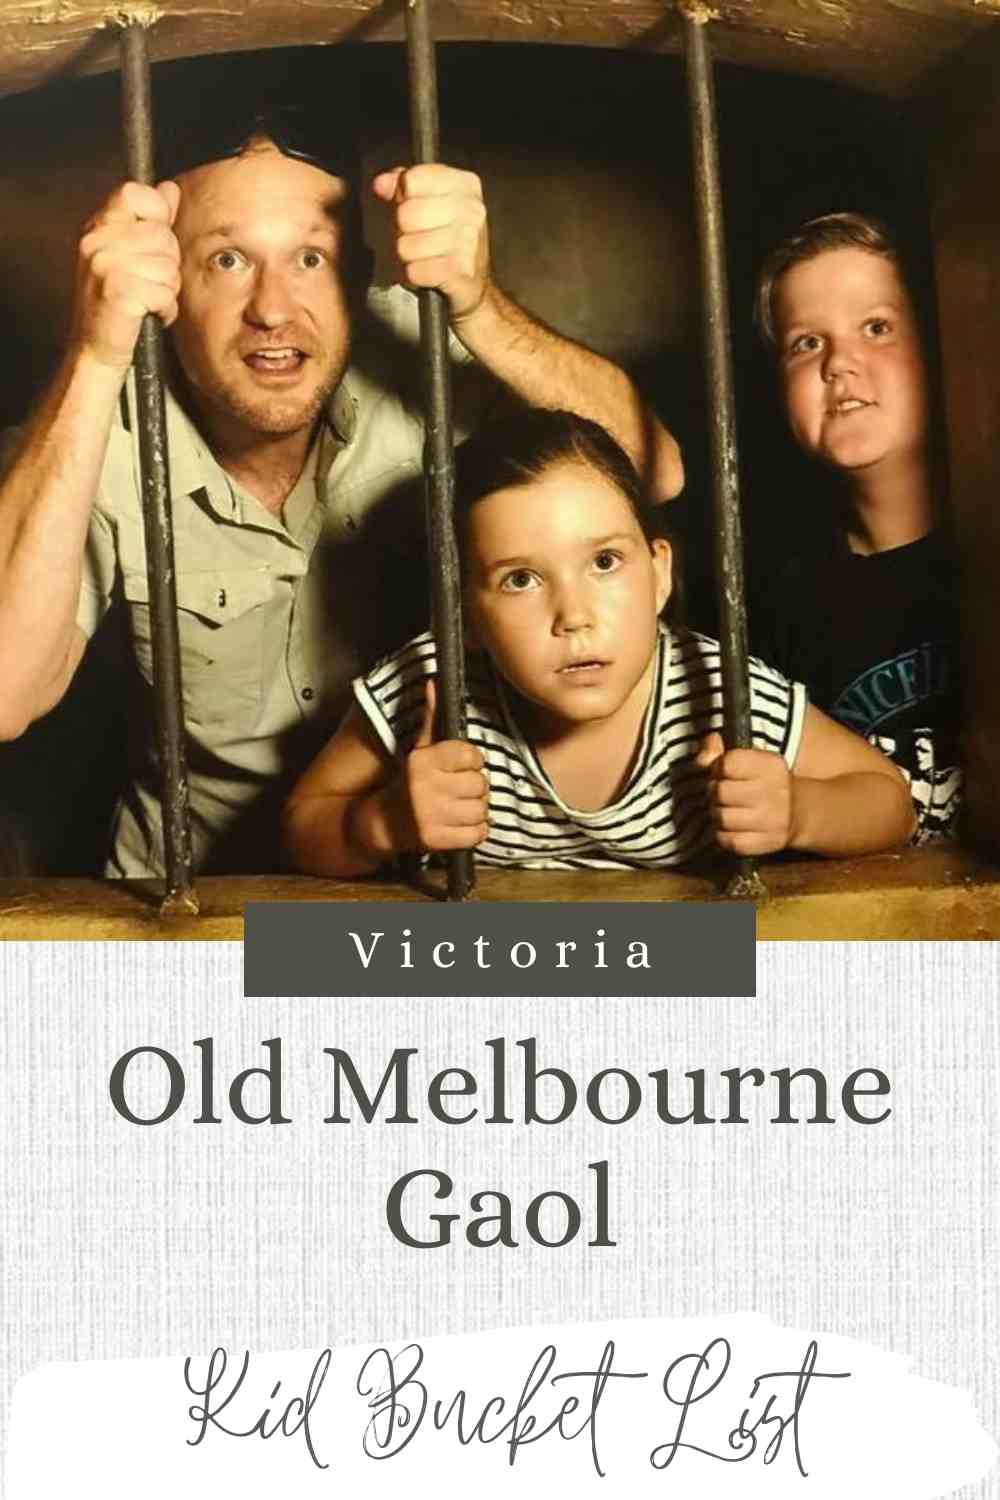 Old Melbourne Gaol Pinned